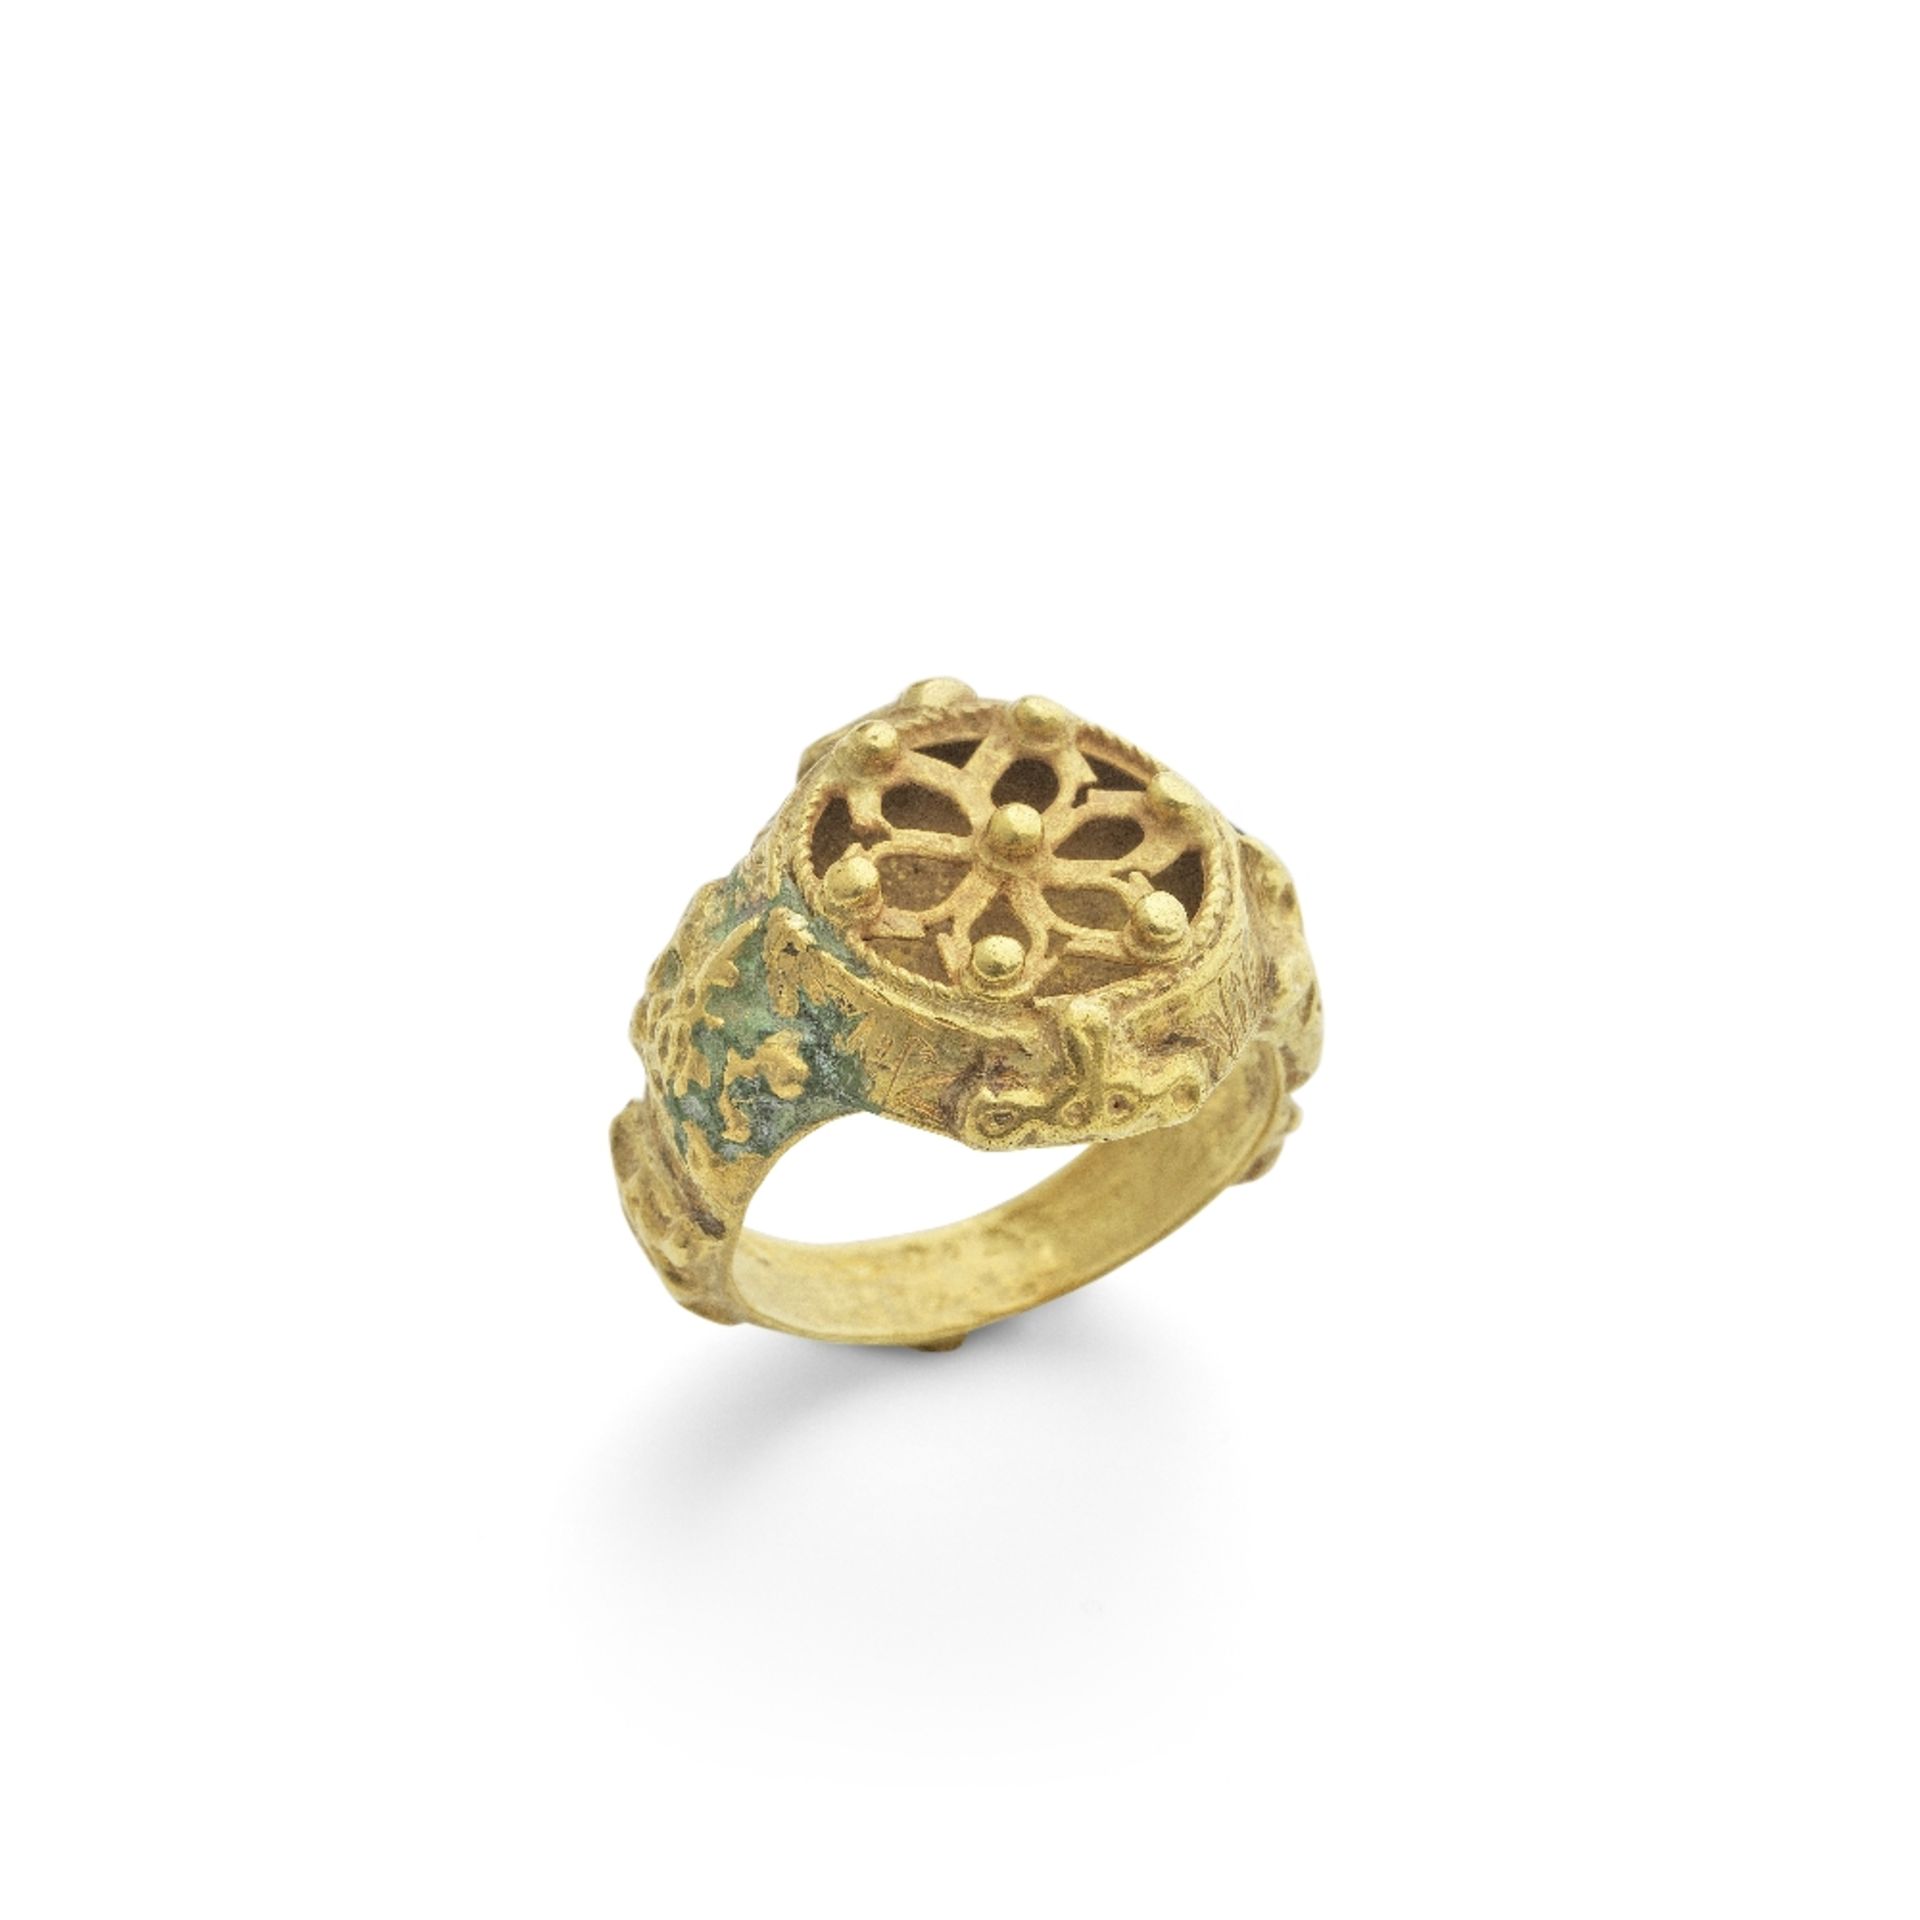 An openwork gold ring Egypt or Persia, 12th/ 13th Century